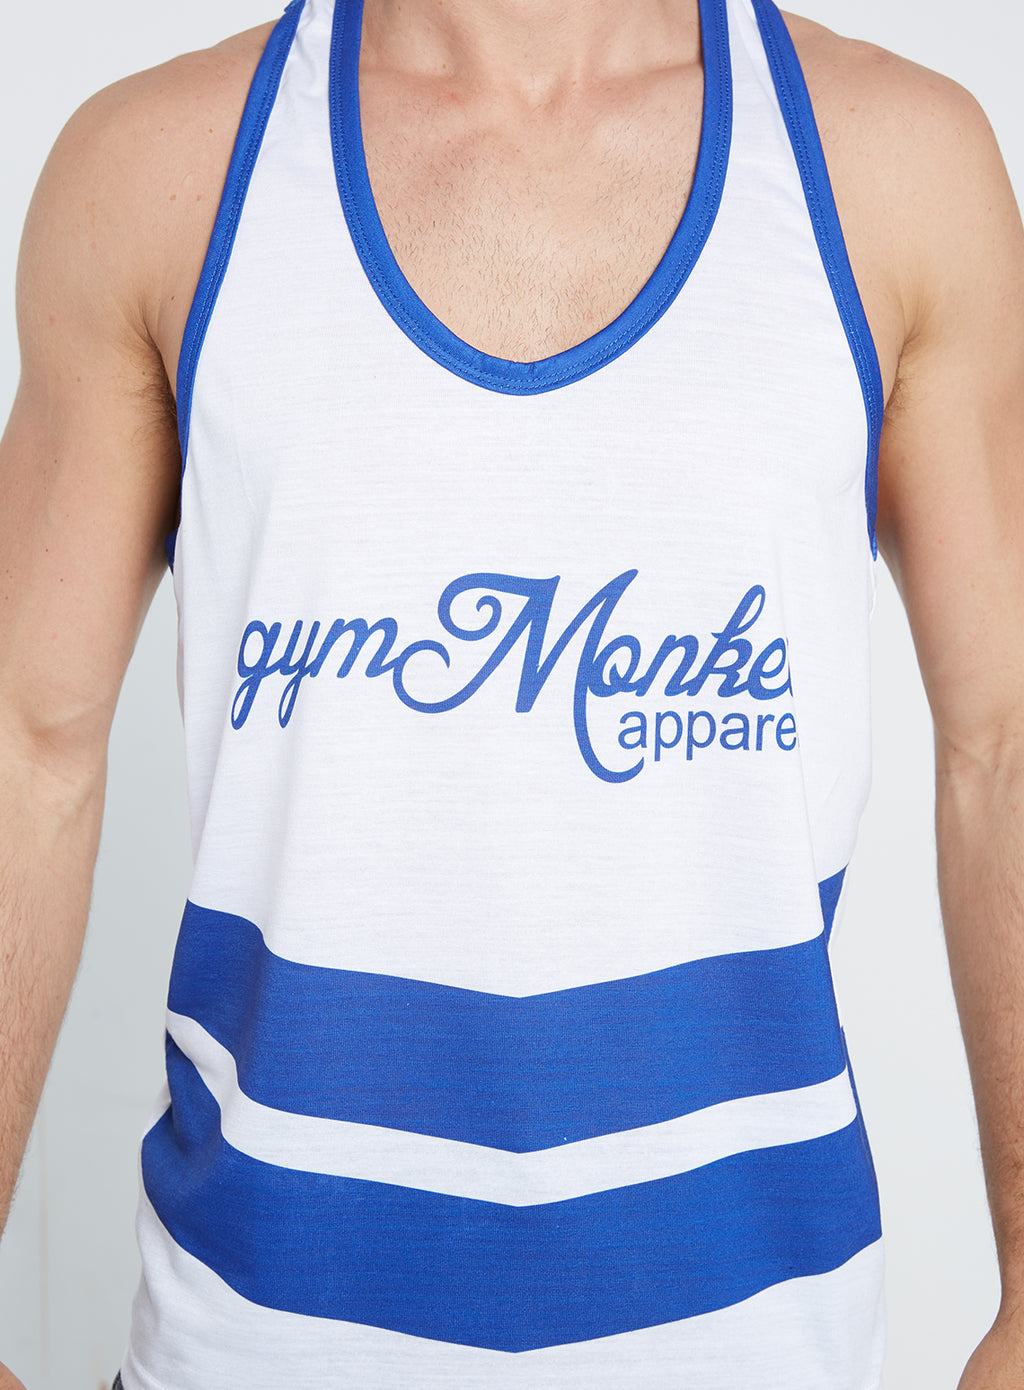 Gym Monkee - Blue and White Sublimated Vest CHEST